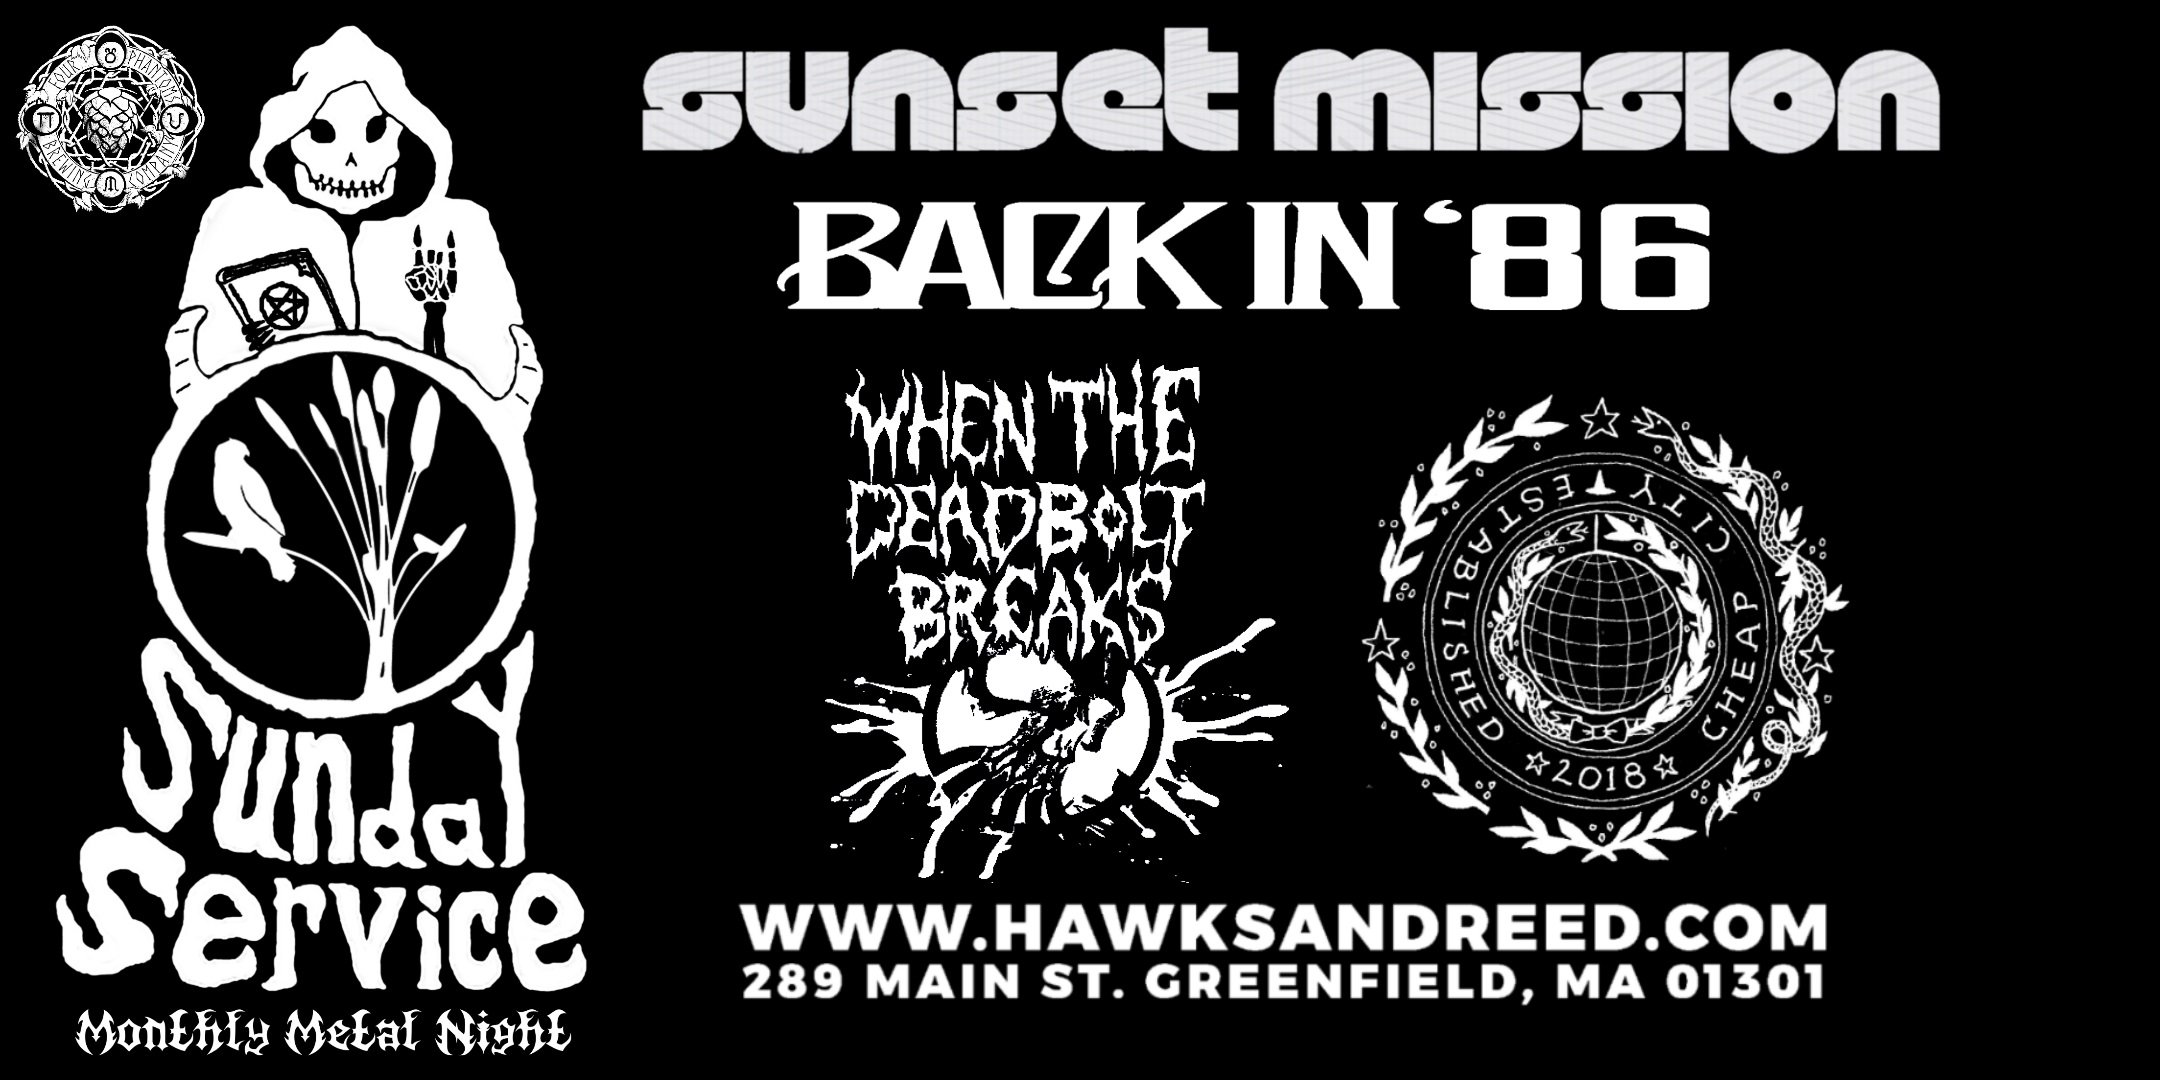 Sunday Service: Metal Night ft. Sunset Mission / Cheap City / Back in ’86 / When the Deadbolt Breaks